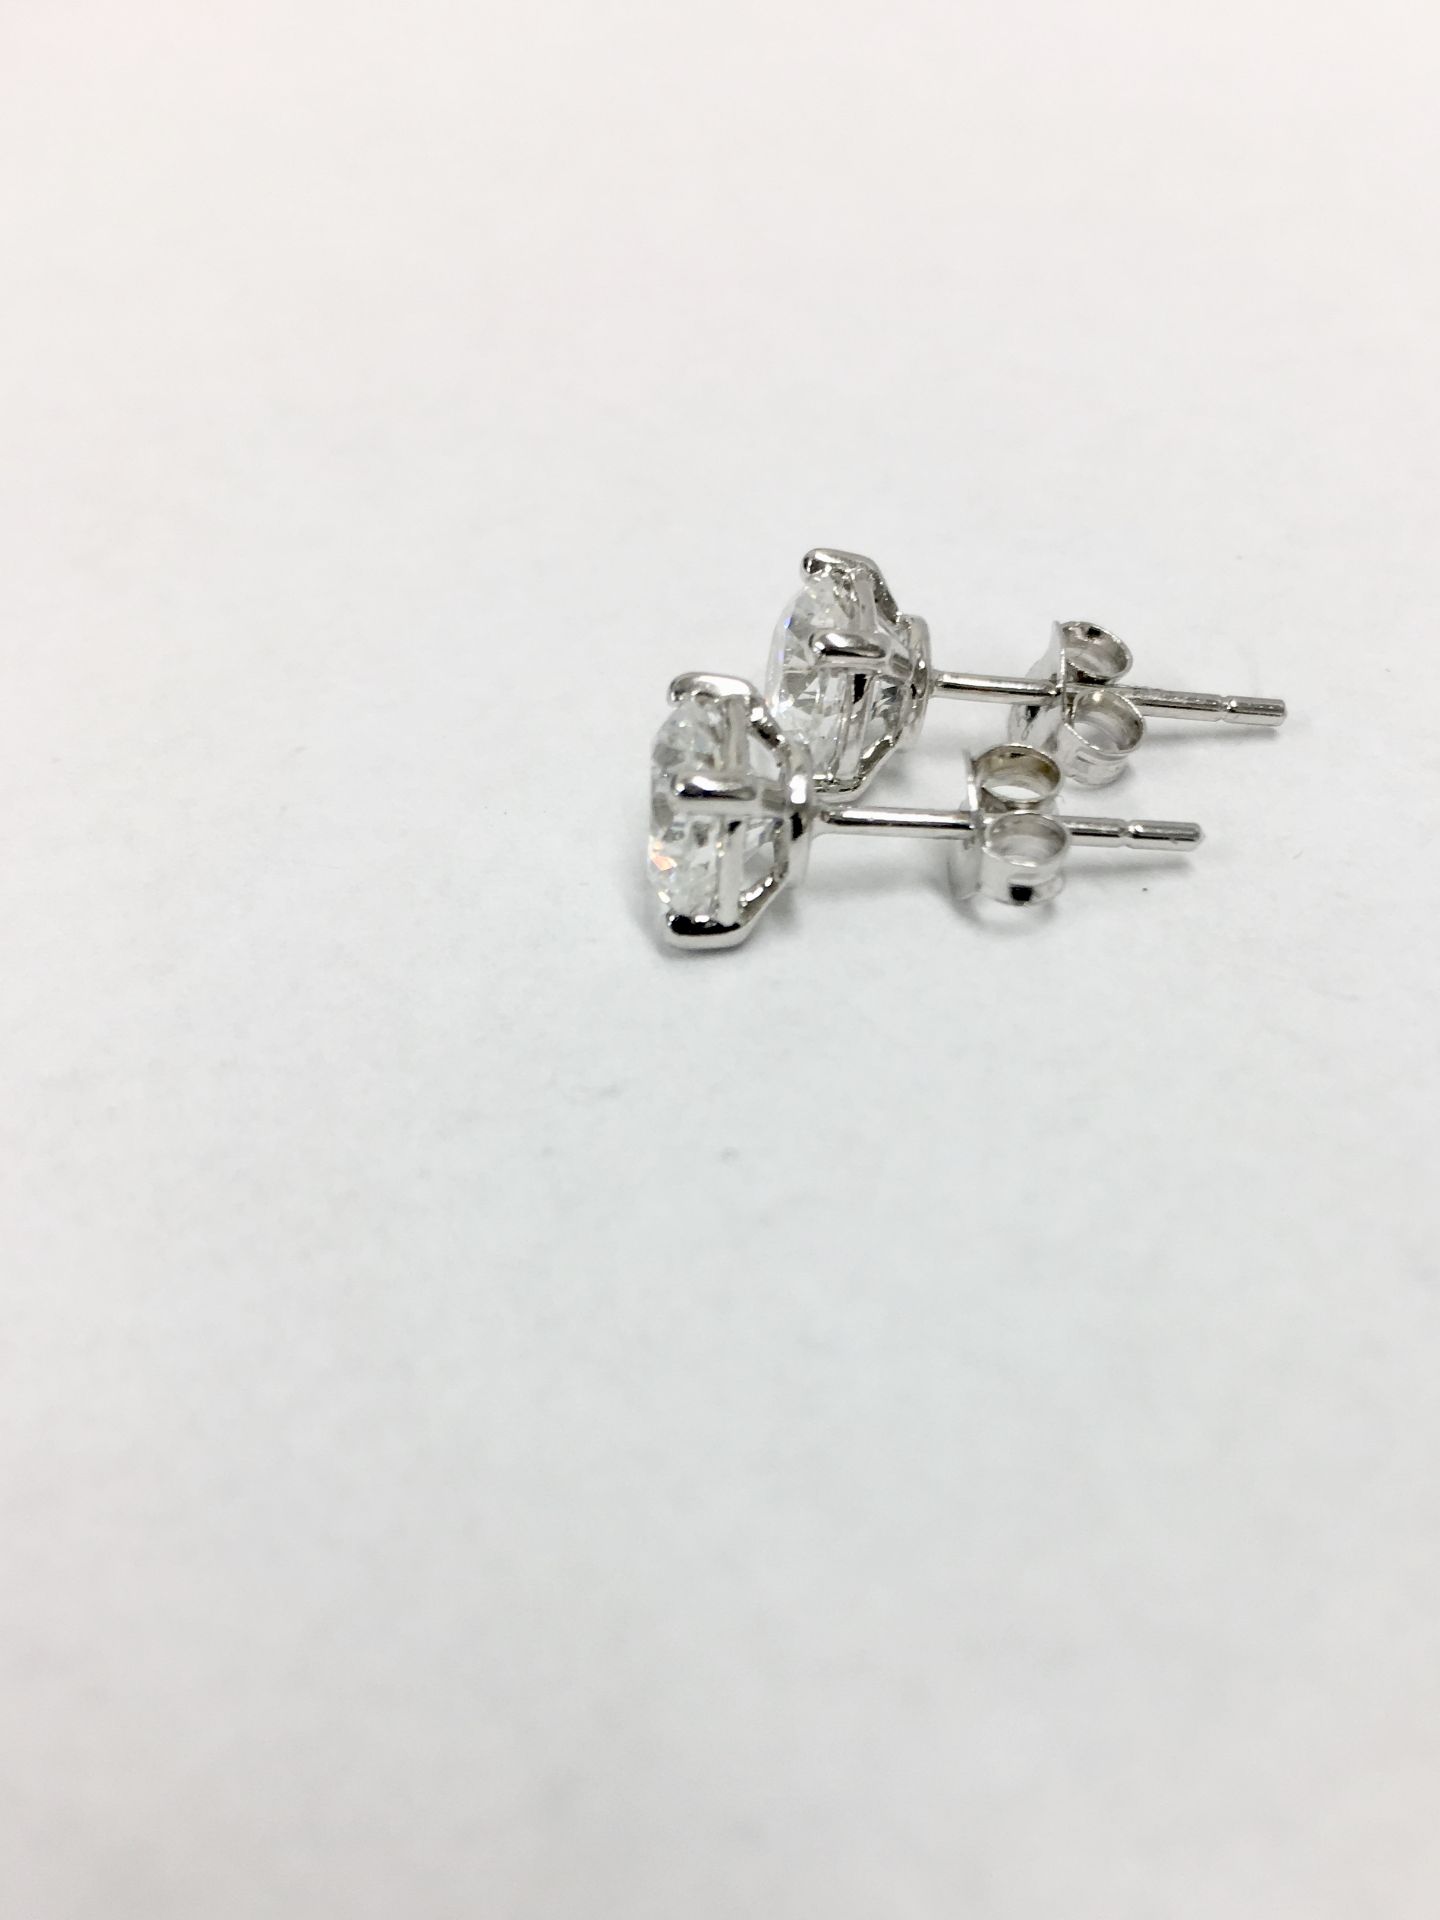 1.20Ct Diamond Solitaire Earrings Set In 18Ct White Gold. - Image 8 of 12